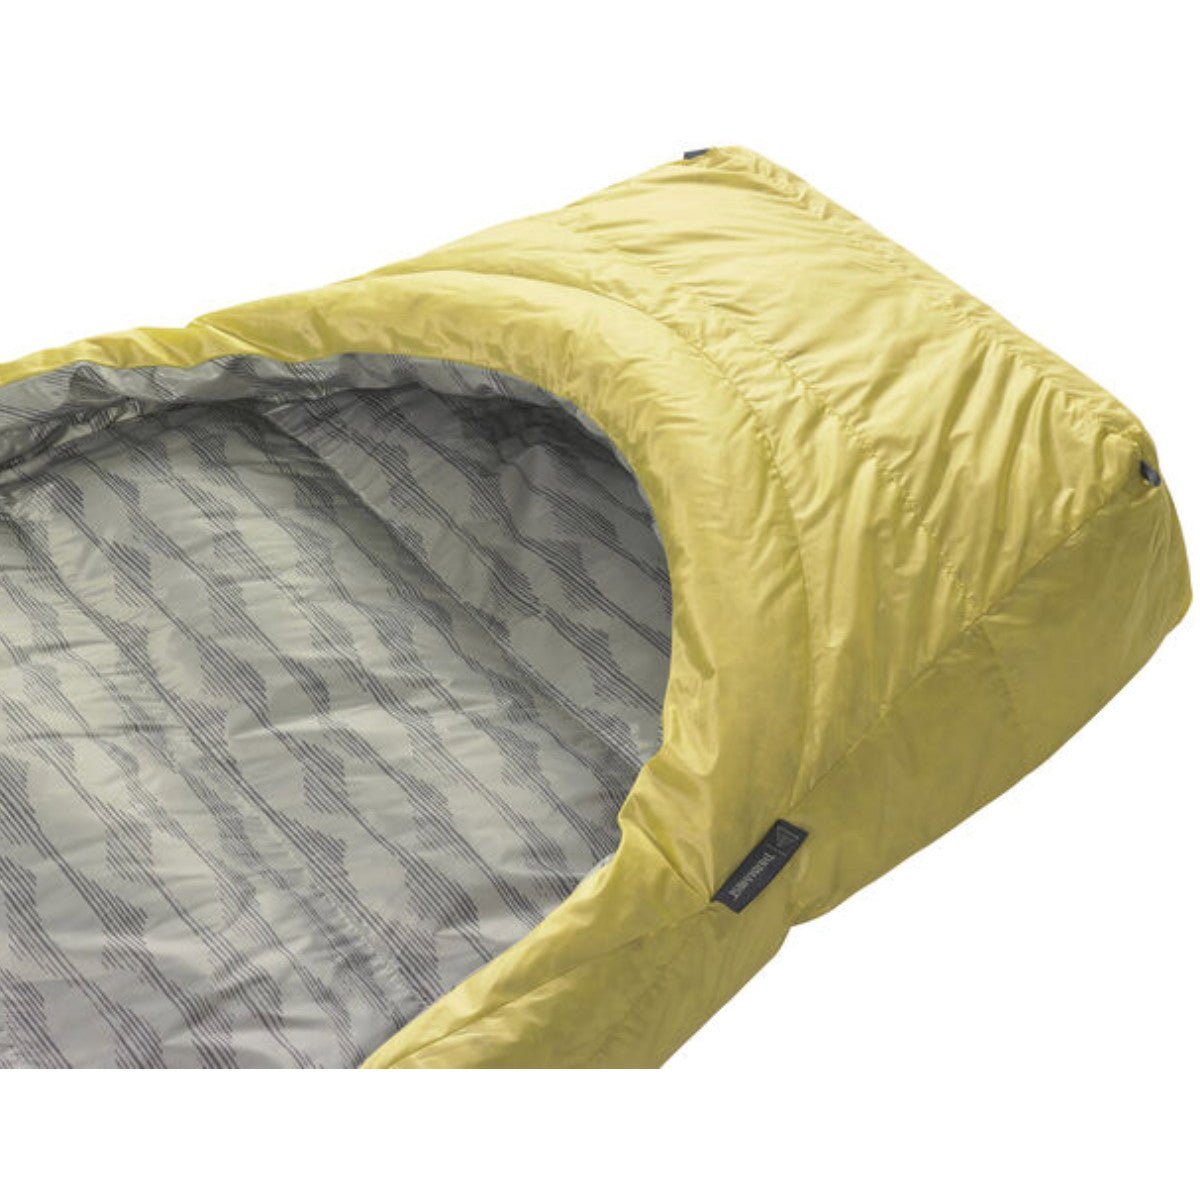 Thermarest Corus 32F/0C Showing foot pocket